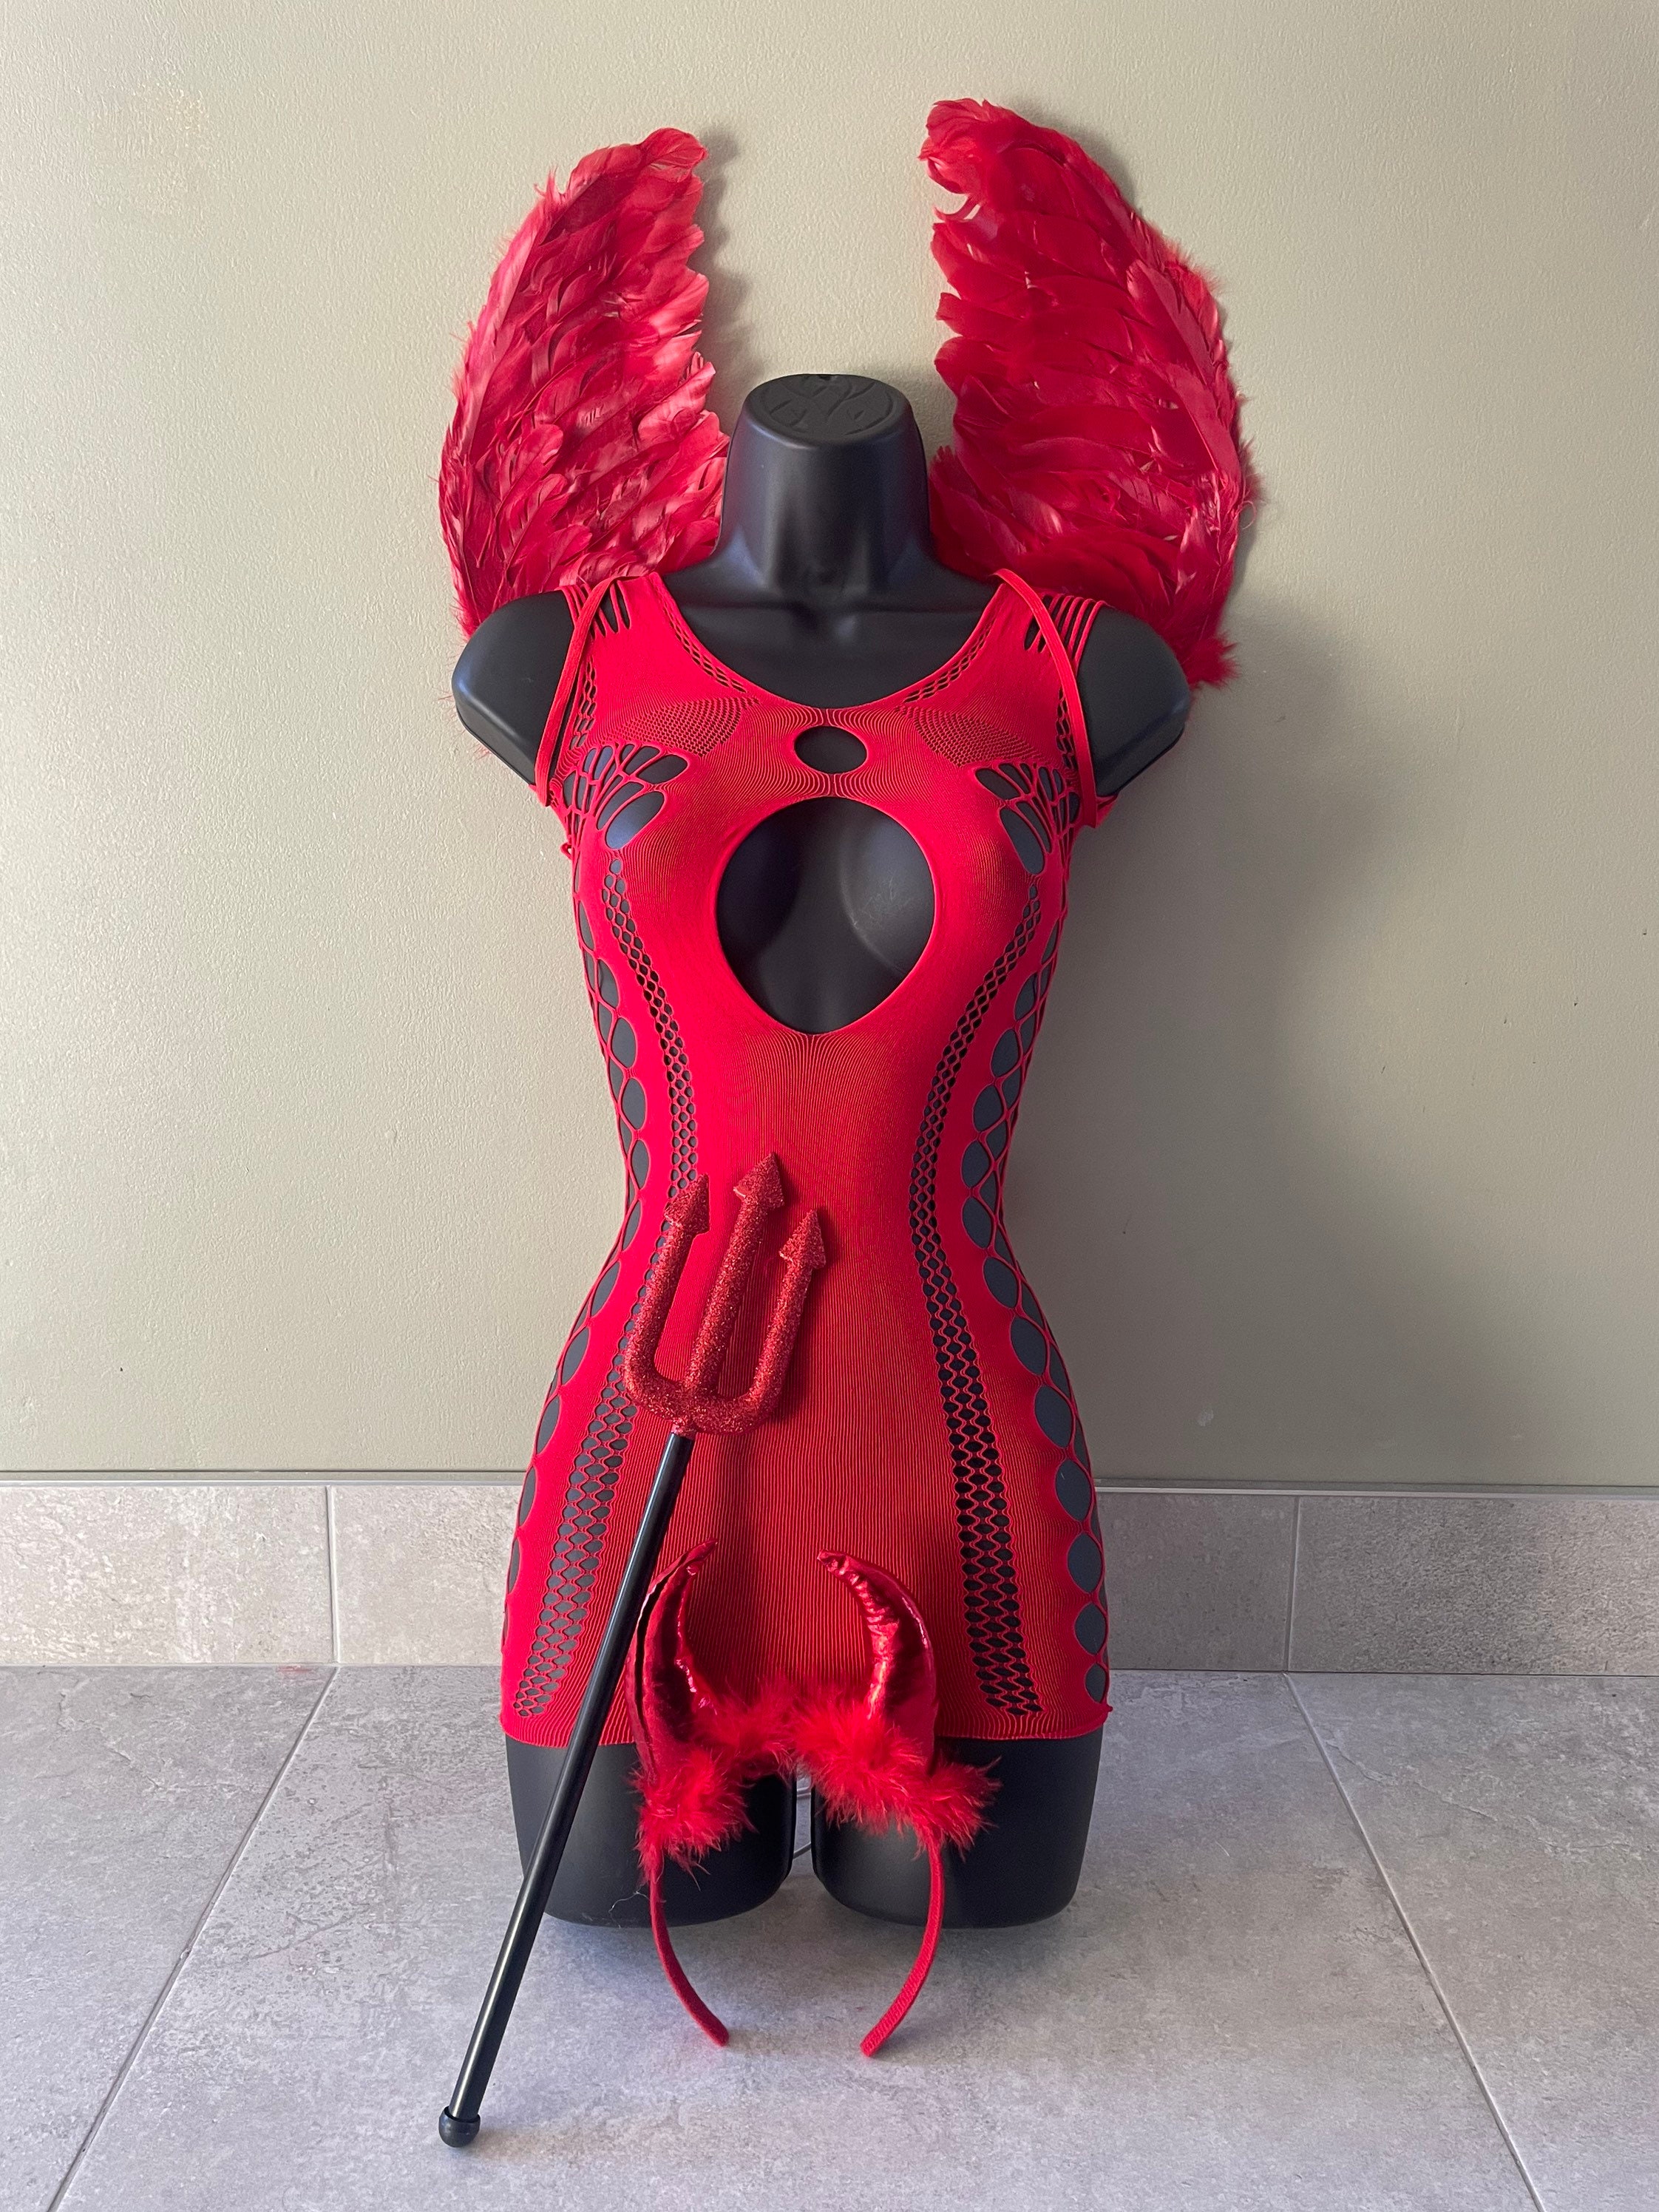 home made devil costumes for adults Adult Pictures